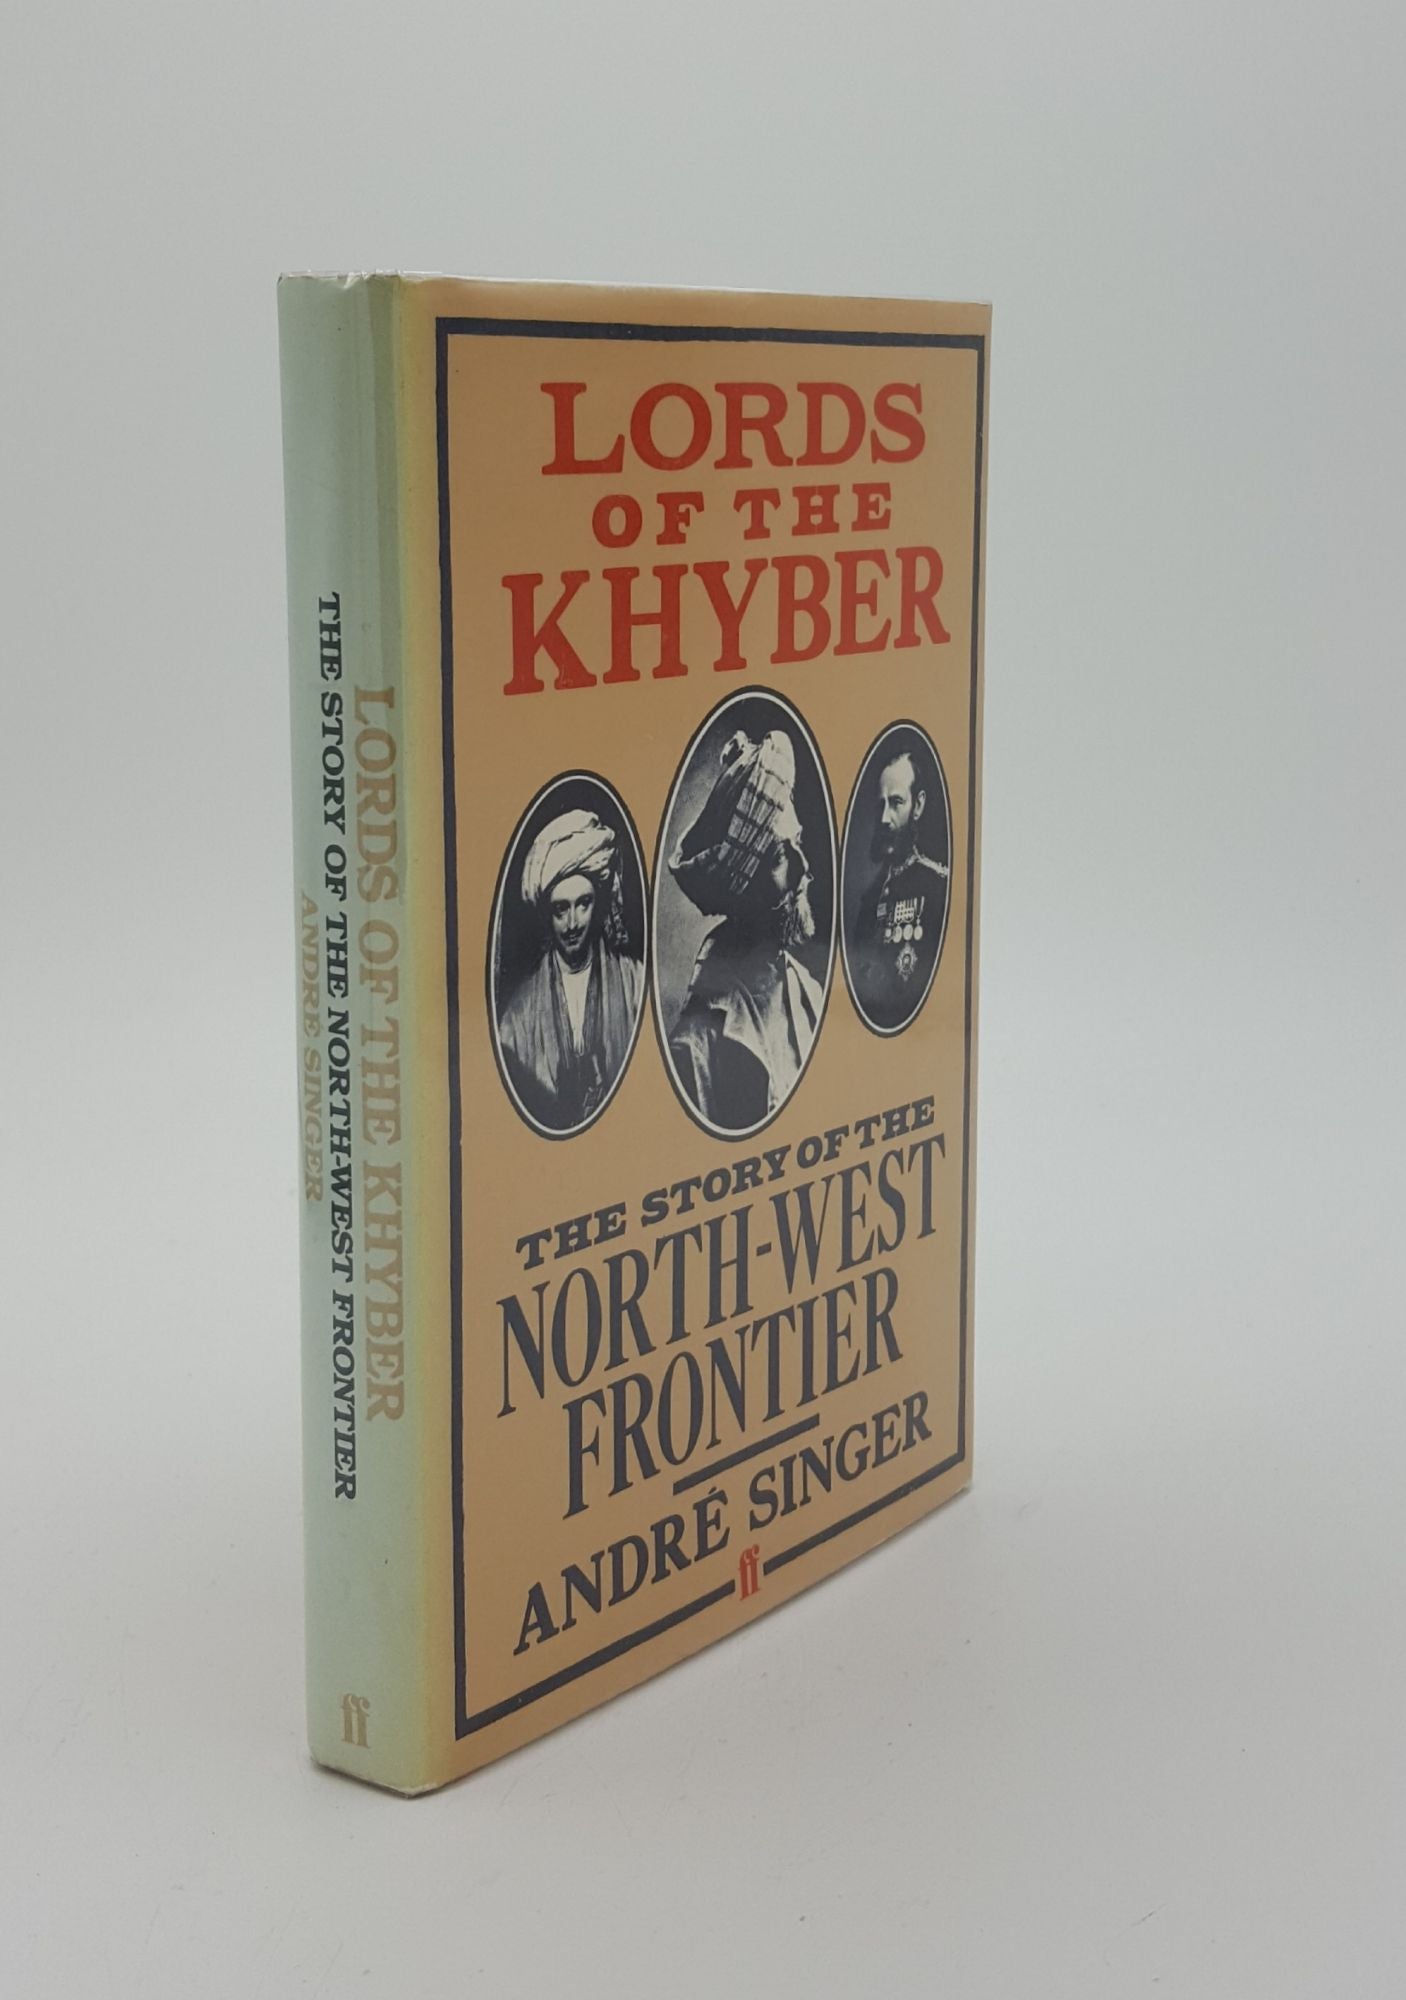 SINGER Andre - Lords of the Khyber Story of the North-West Frontier